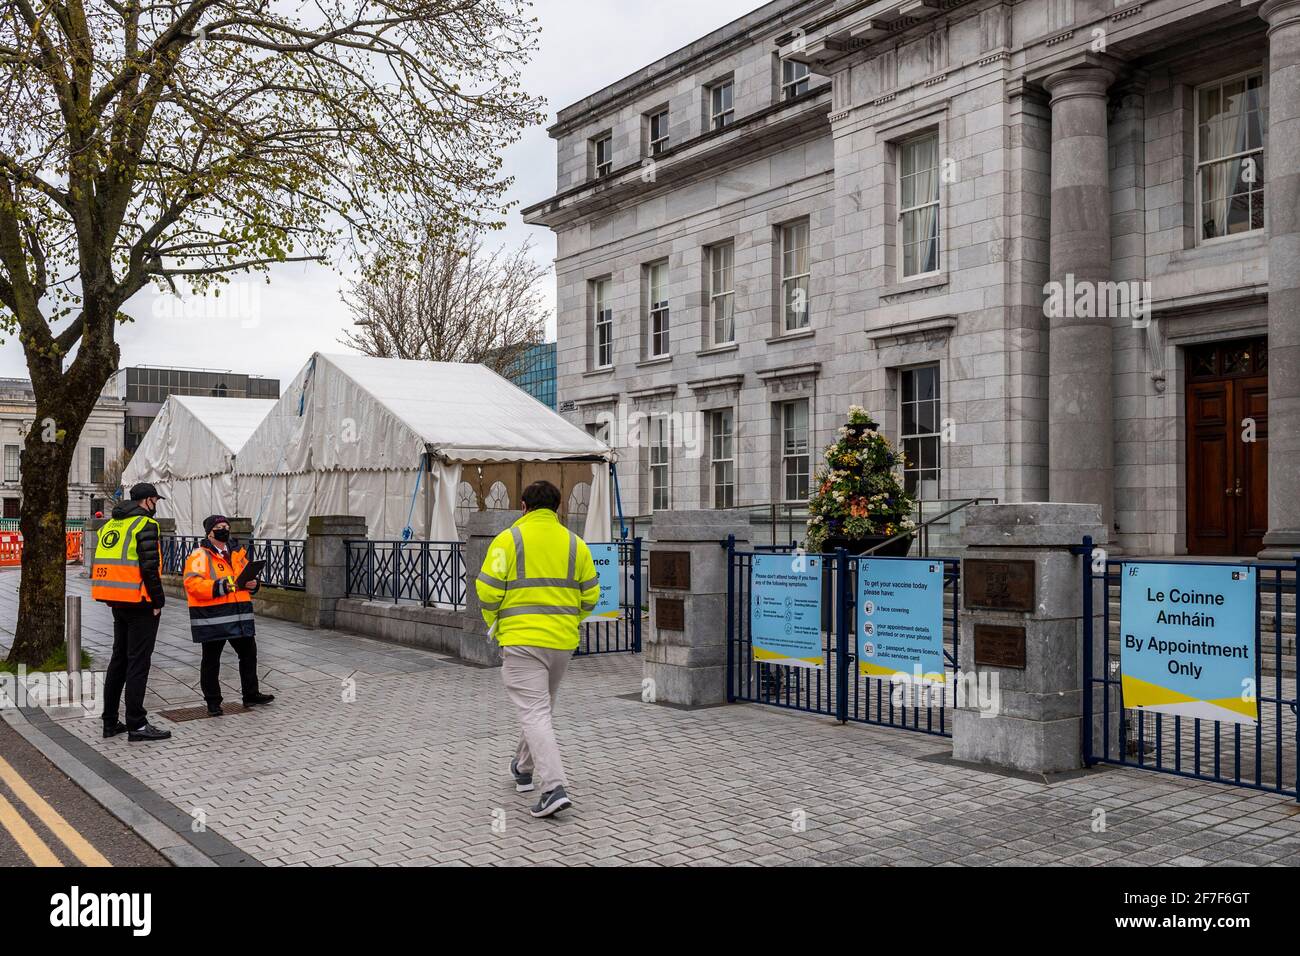 Cork, Ireland. 7th Apr, 2021. The Mass Vaccination Centre at Cork City Hall was open early this morning, ready to continue the COVID vaccine roll-out. Credit: AG News/Alamy Live News Stock Photo